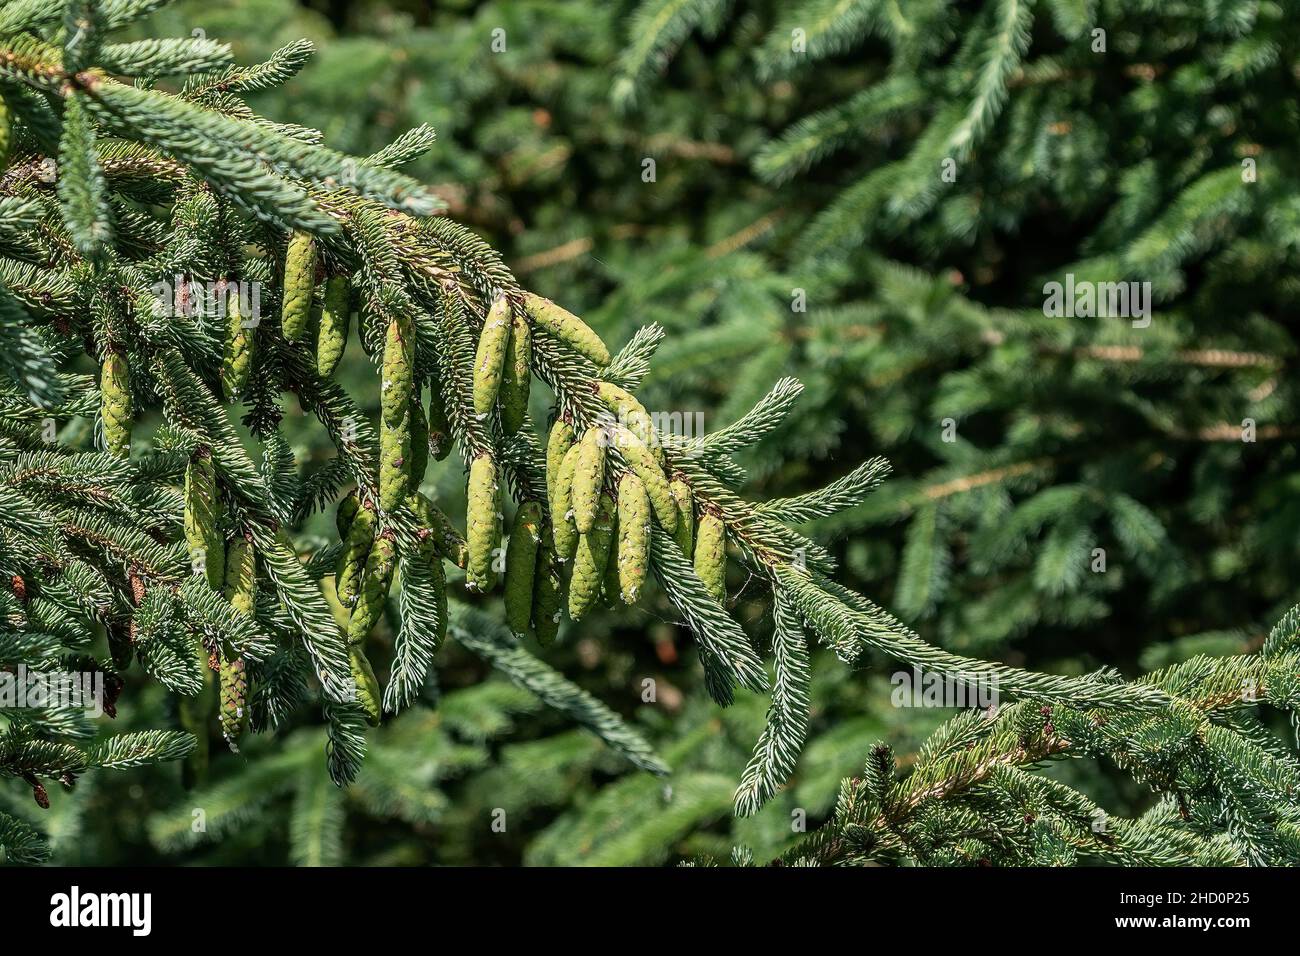 A branch of a Spruce Tree, Sitka, Picea sitchensis, growing in woodland Stock Photo